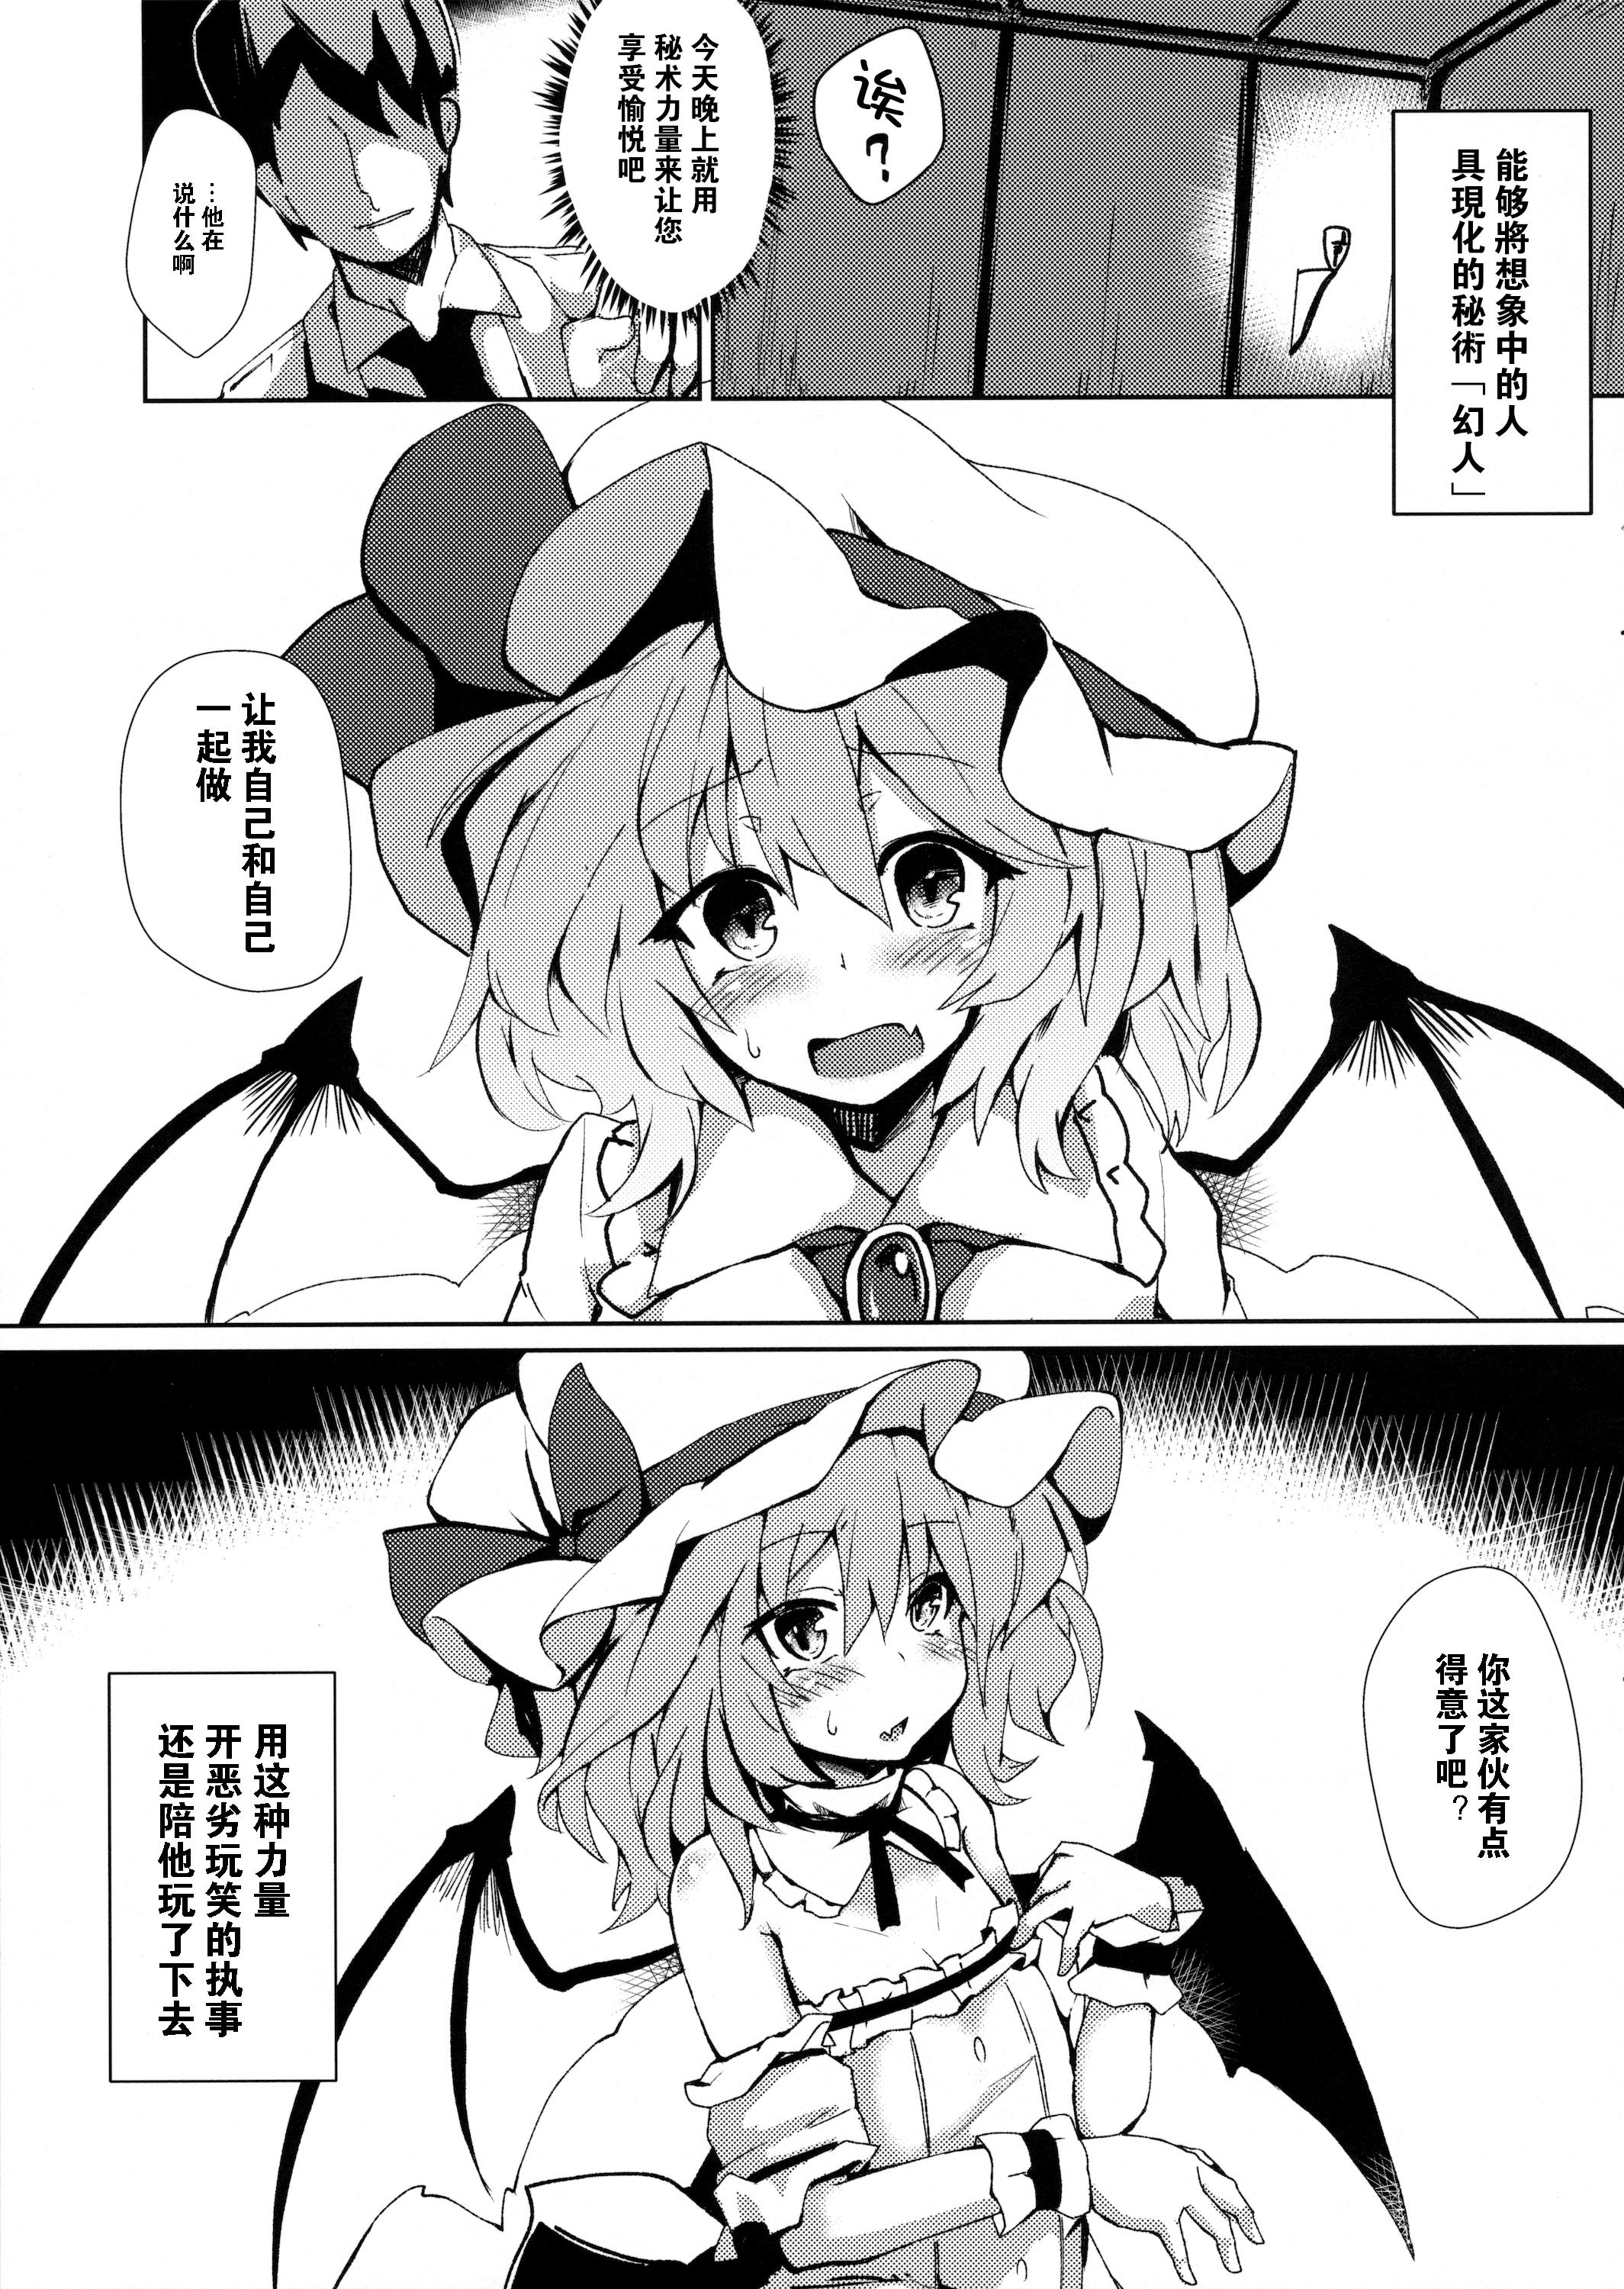 Hot Teen Red + Scarlet - Touhou project Women Sucking Dicks - Page 3